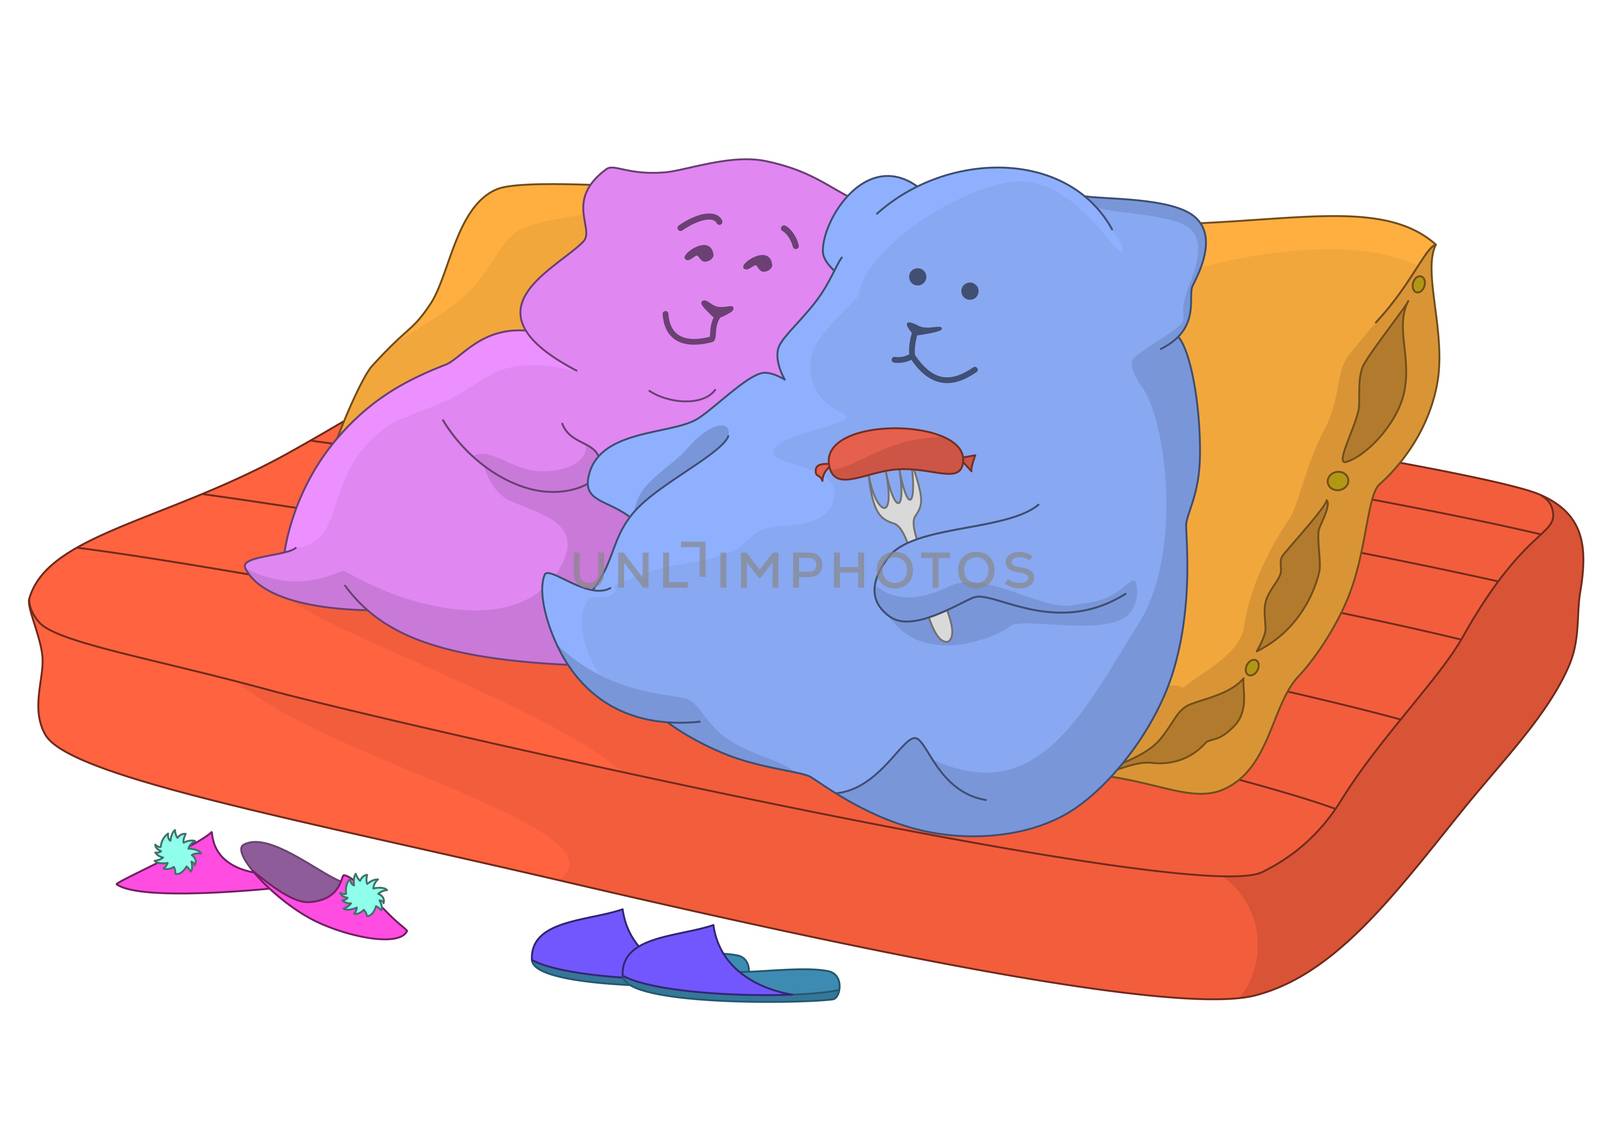 Pillows. Family on a sofa by alexcoolok